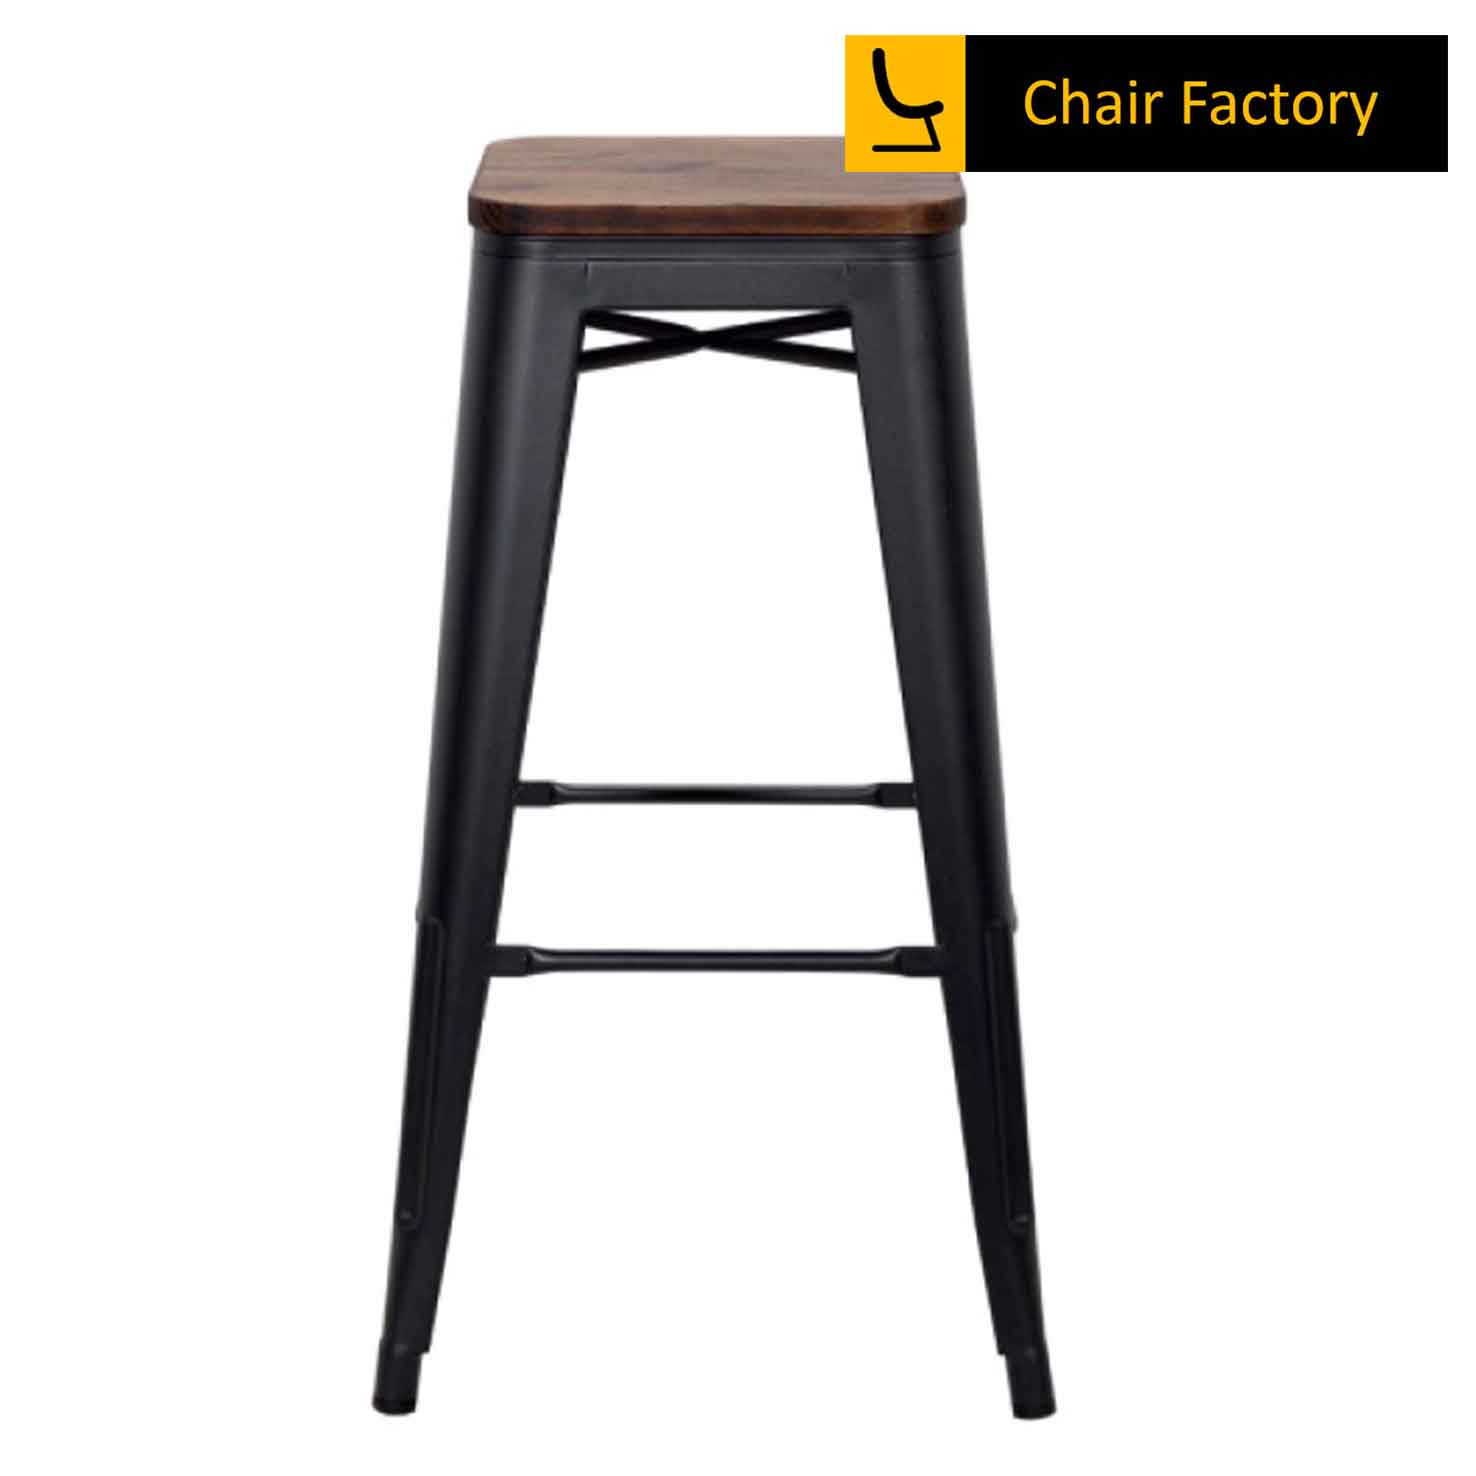 Tolix stool with wooden seat high counter bar stool